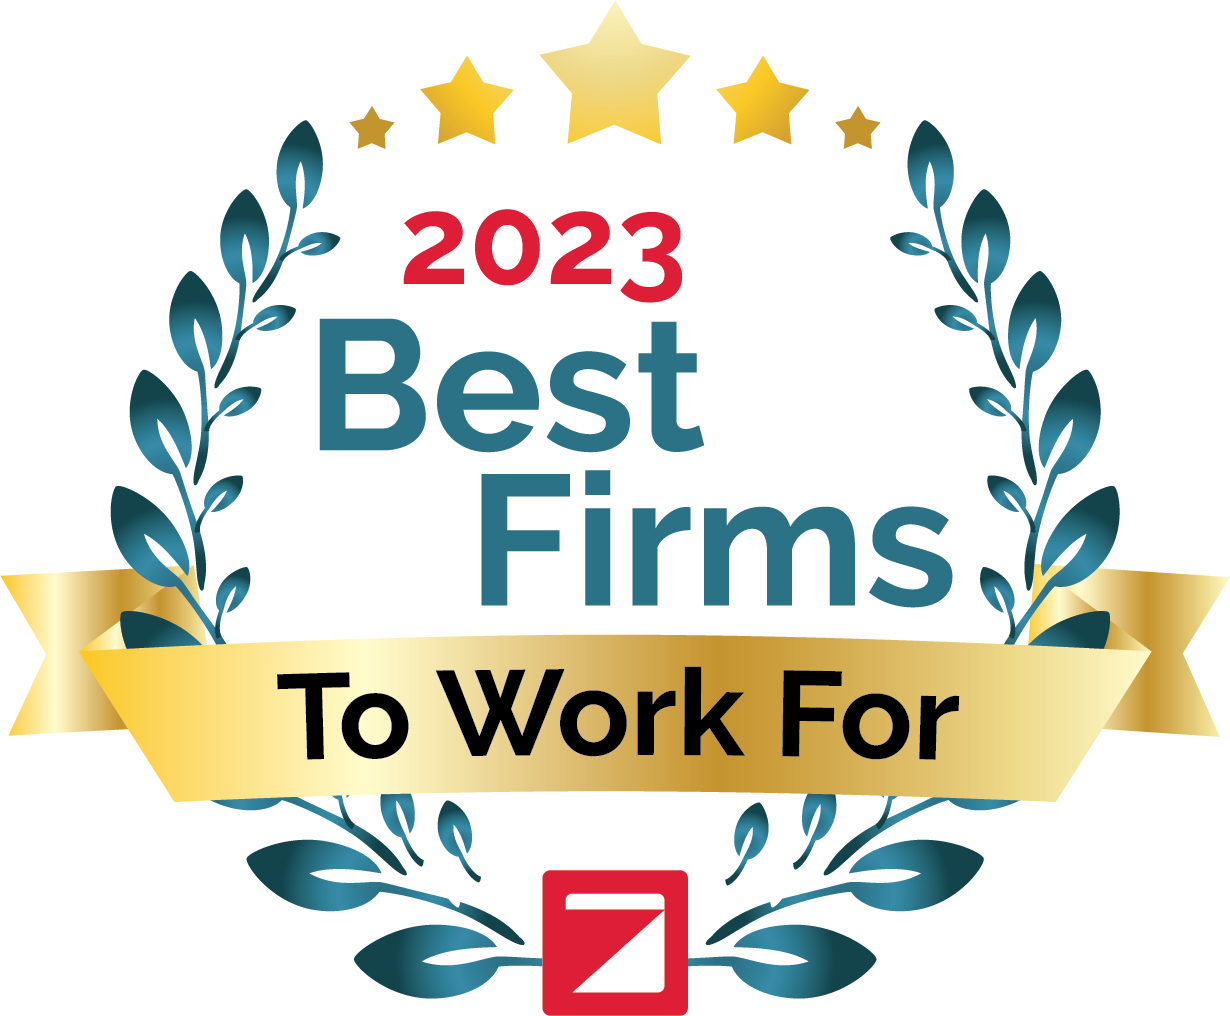 2023 Best Firms To Work For badge